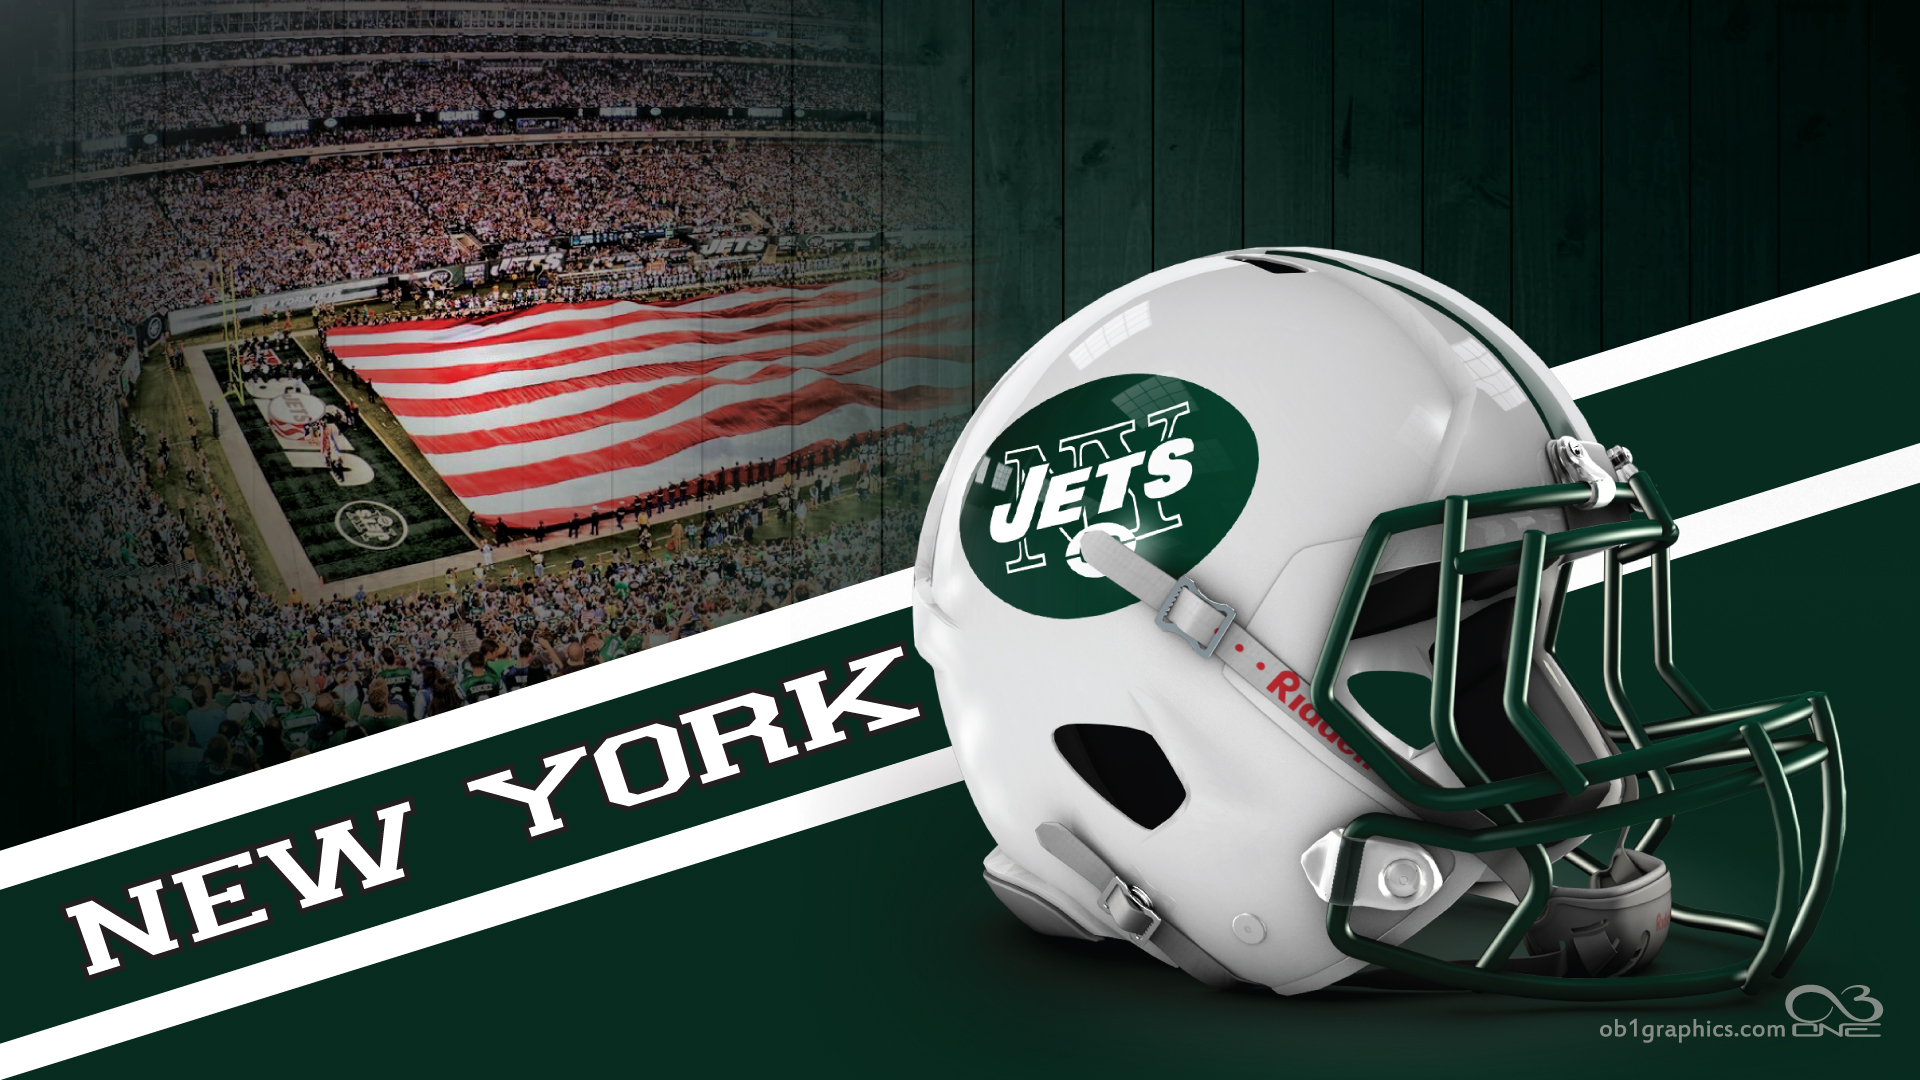 New York Jets Wallpaper Background What More Could You